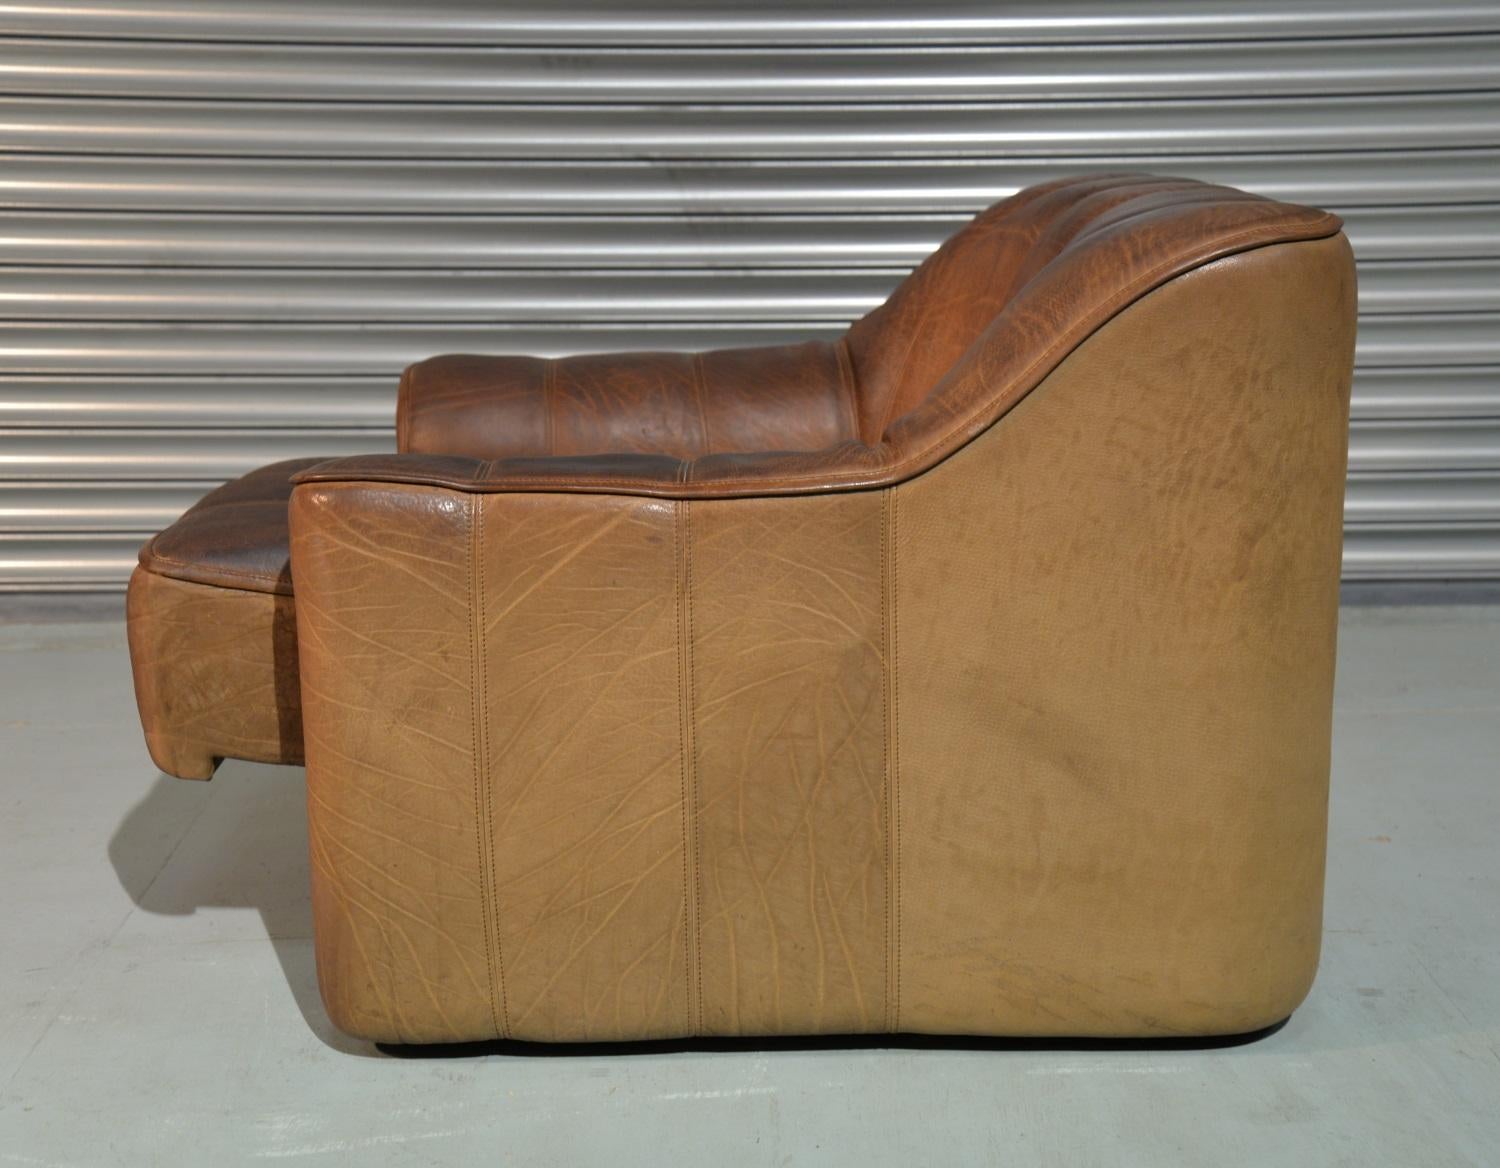 Discounted airfreight for our International customers ( from 2 weeks door to door ) 

We are delighted to bring to you a vintage 1970s De Sede DS 44 armchair in thick buffalo leather. This vintage armchair was built circa 1970s by De Sede craftsman